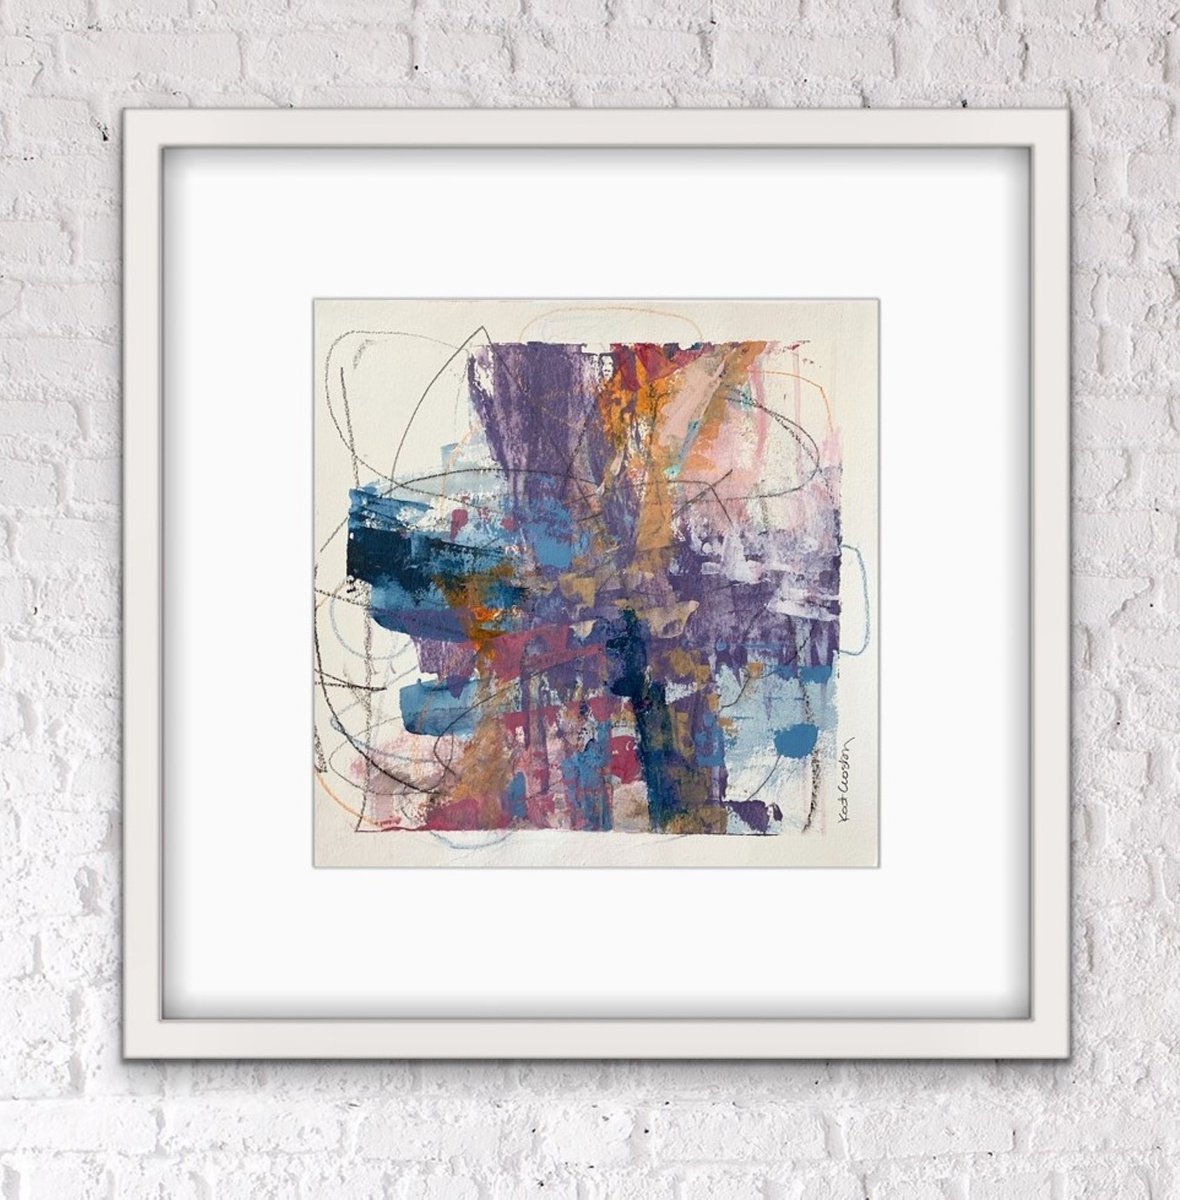 Sugared Violets - Small scale colorful abstract expressionism by Kat Crosby